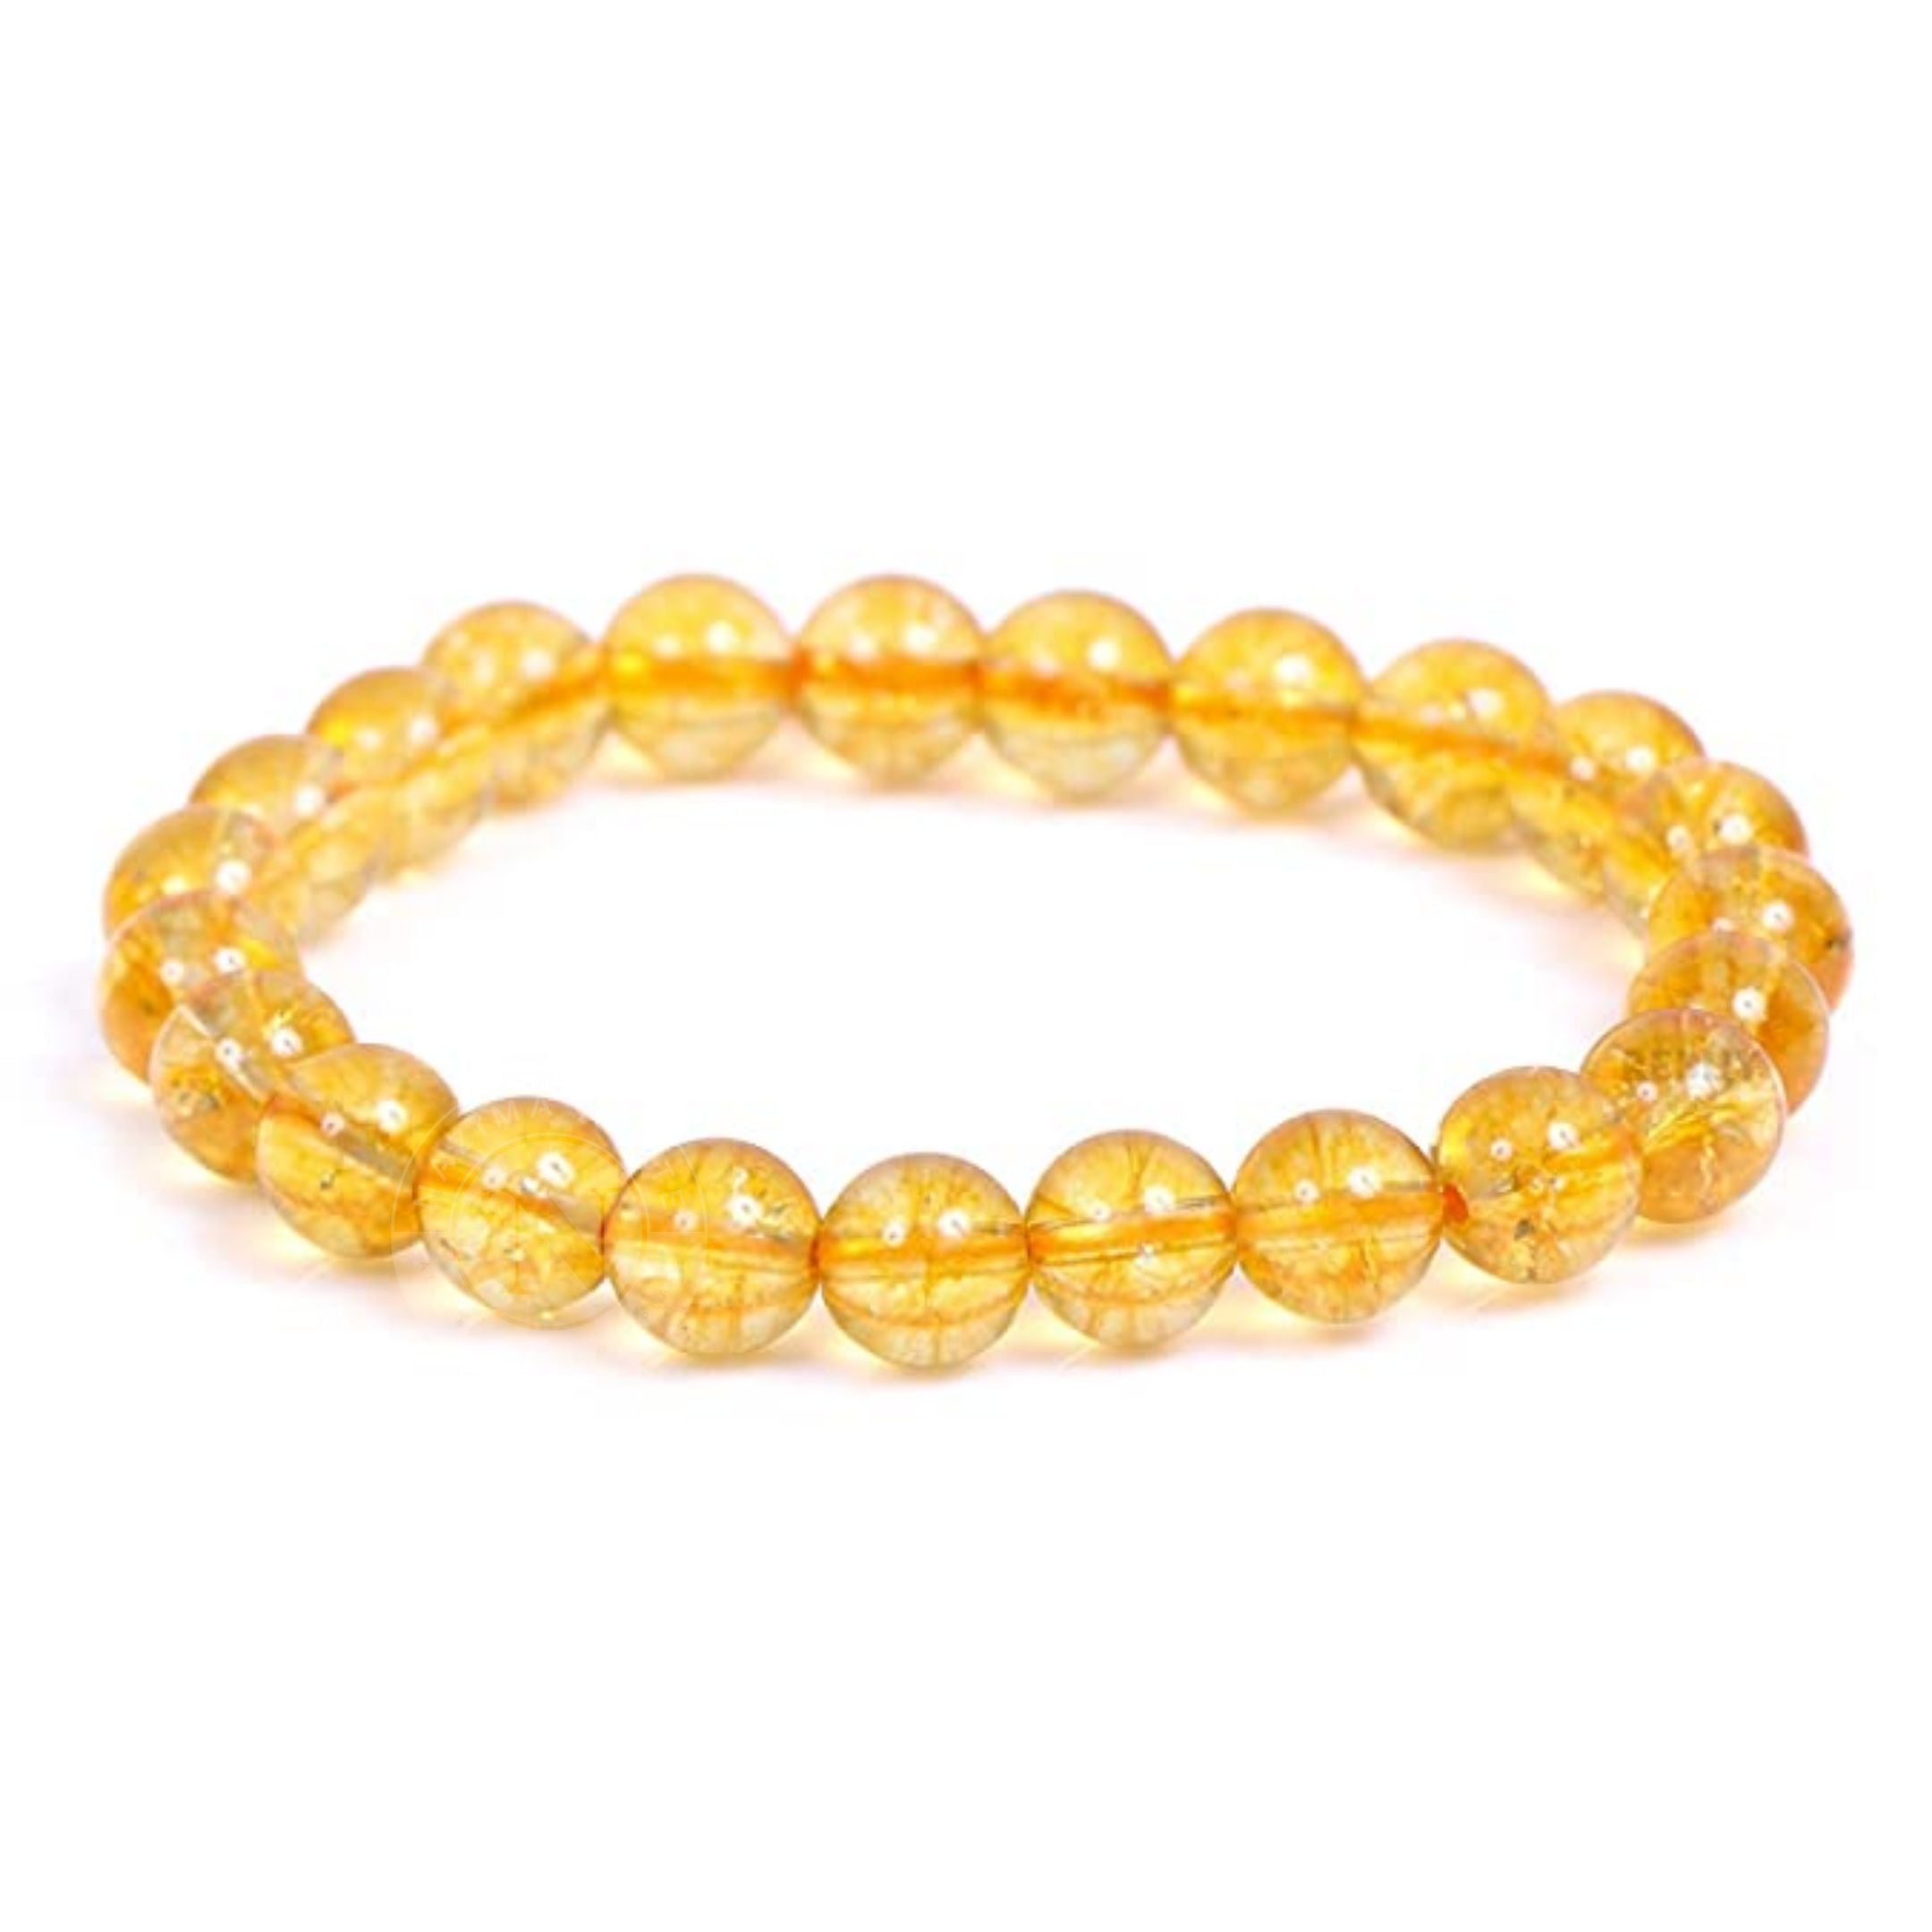 12 Eye and Ruyi Dzi Beads with Faceted Citrine Bracelet - Buy-FengShui.com